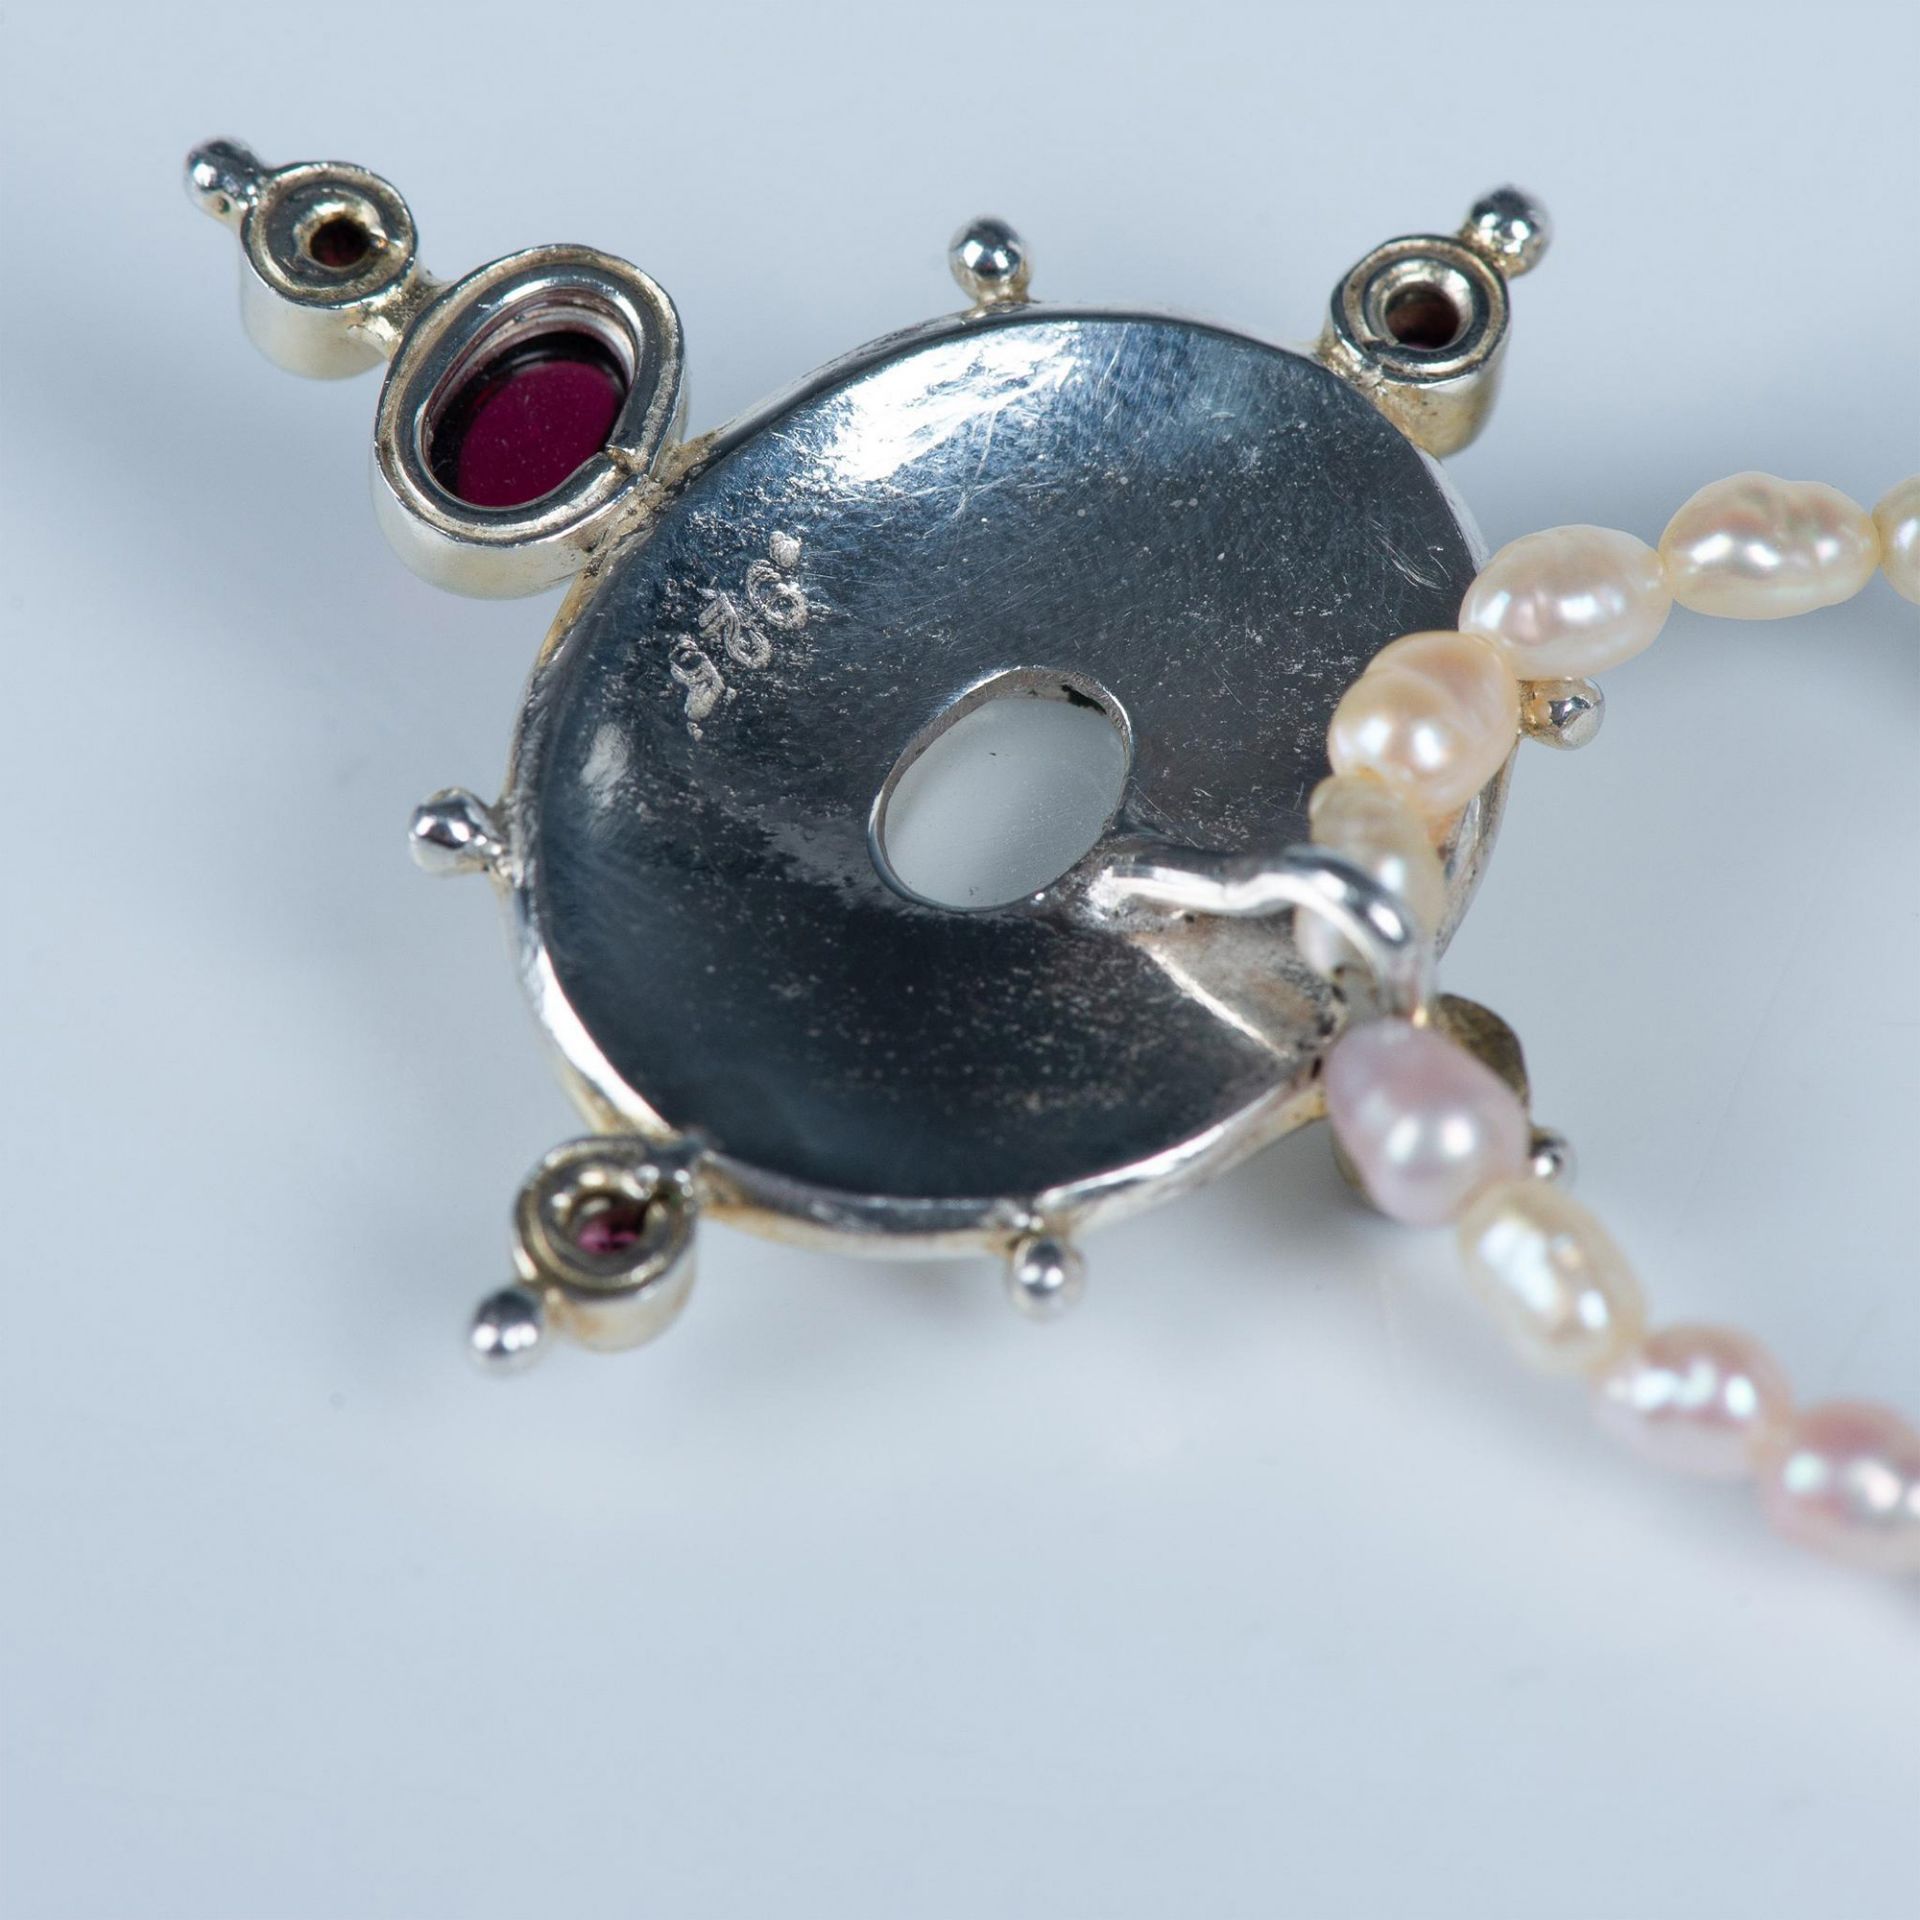 Fabulous Sterling Silver Baroque Pink Pearl, Garnet and Moonstone Necklace - Image 4 of 4